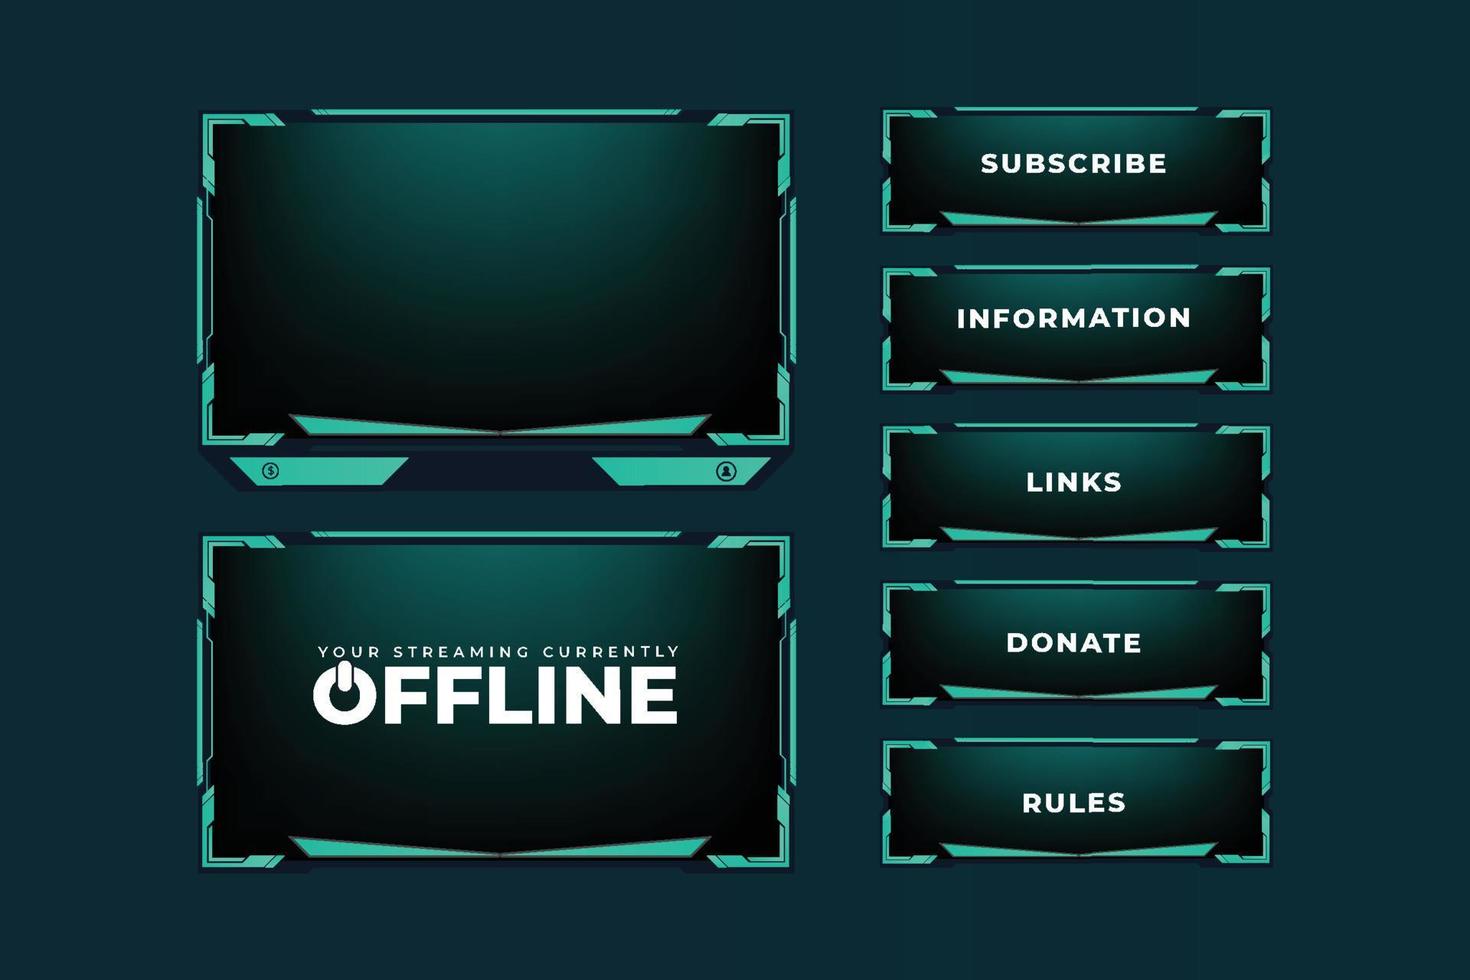 Futuristic gaming overlay vector for screen panels with colorful buttons. Live streaming overlay decoration for online gamers. Green Live stream overlay design with offline screen section.